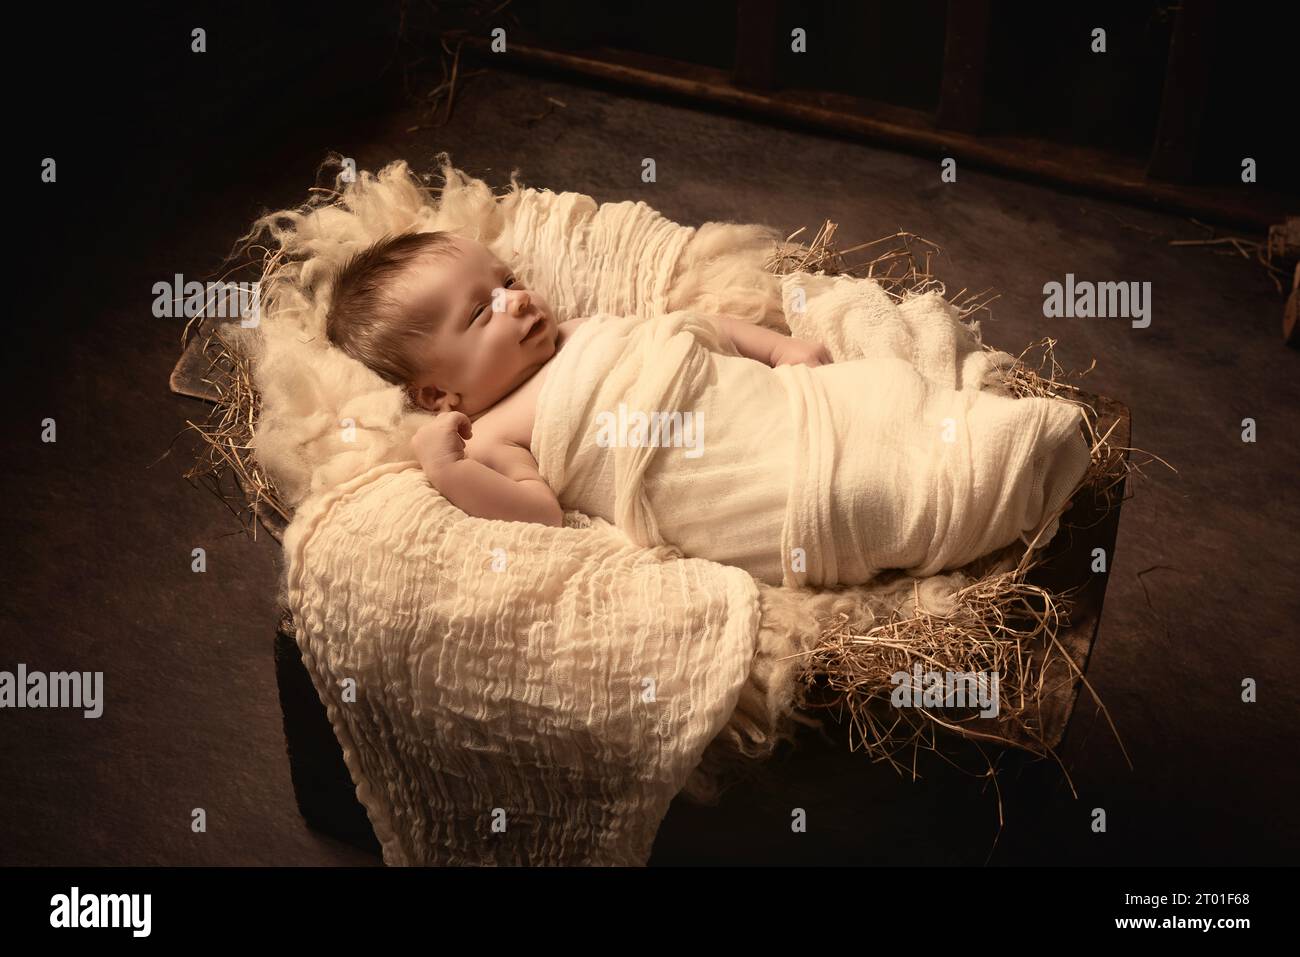 Live Christmas nativity scene of 8 days old baby boy sleeping in a manger Stock Photo